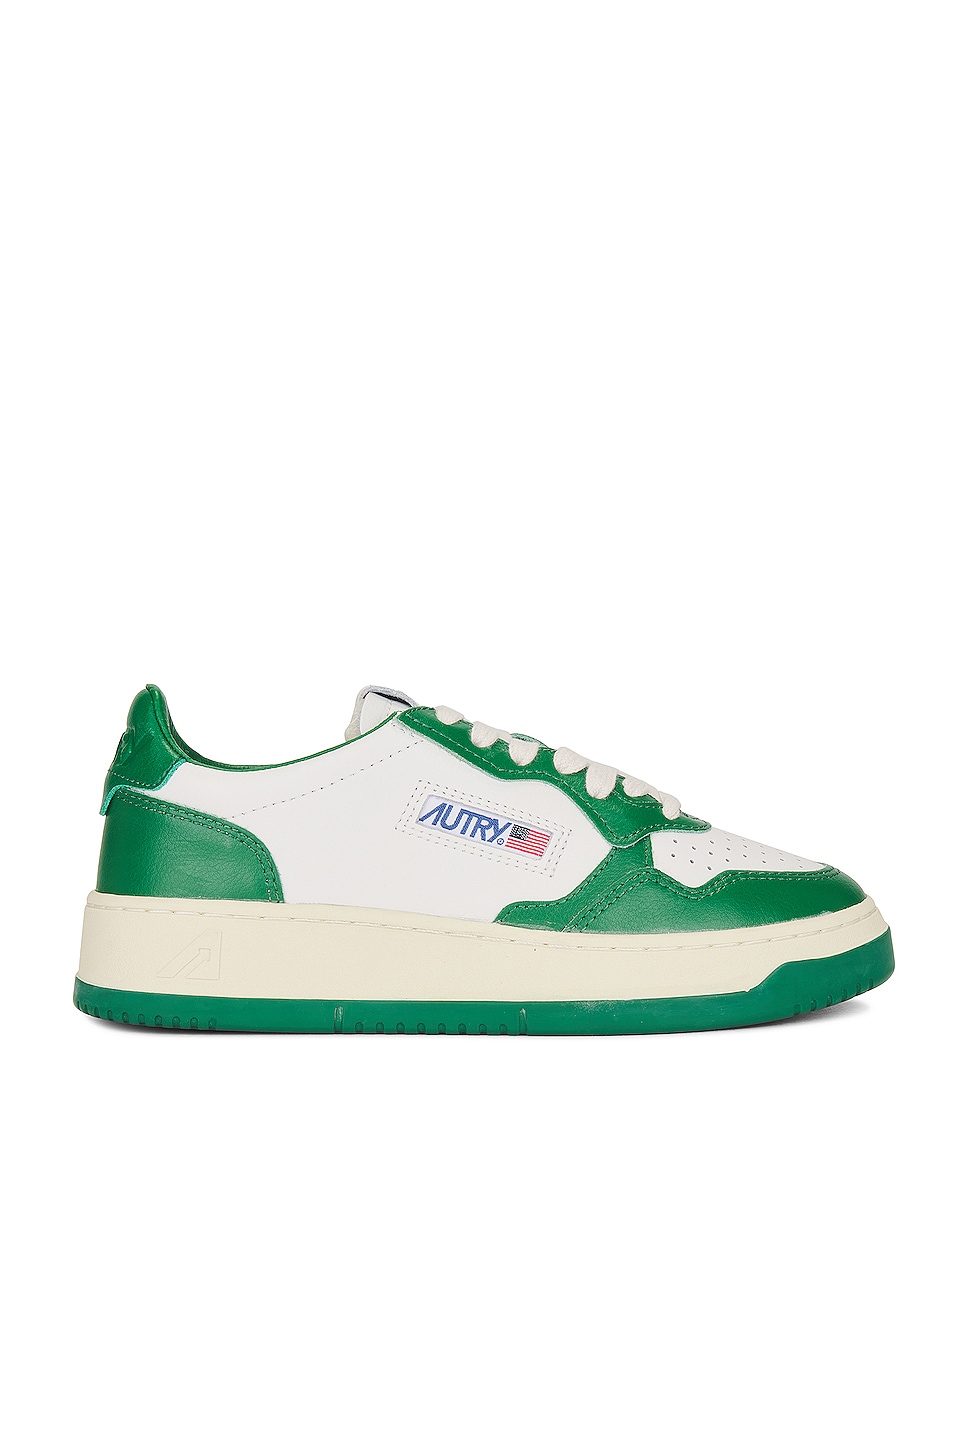 Image 1 of Autry Medalist Low Sneaker in Leather, Leather White, & Green